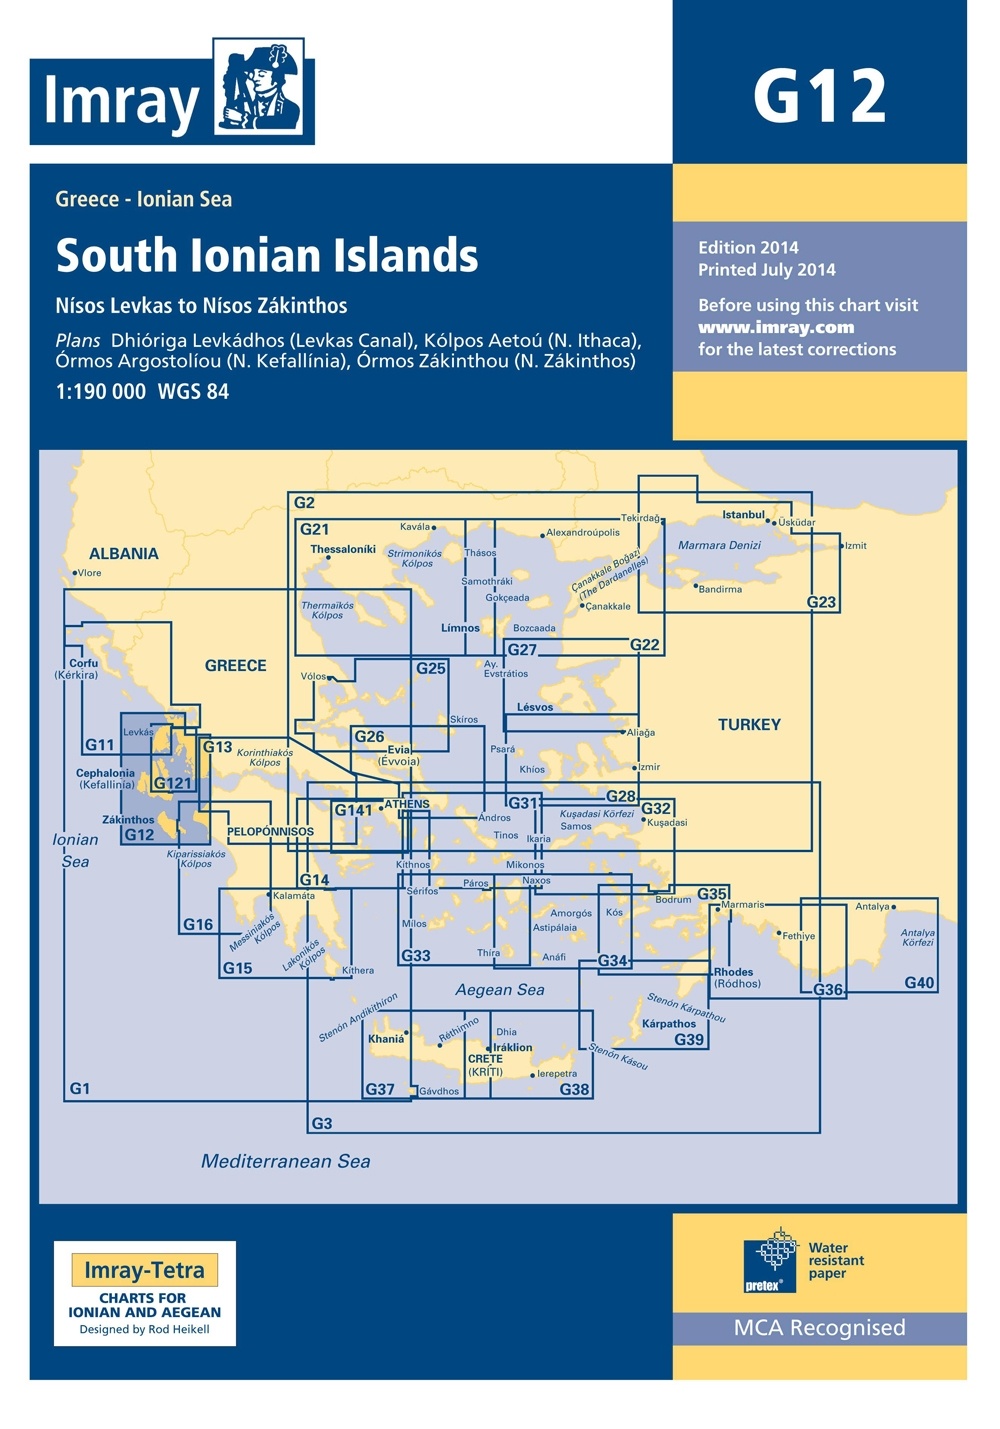 G12 South Ionian Islands "1:190,000"